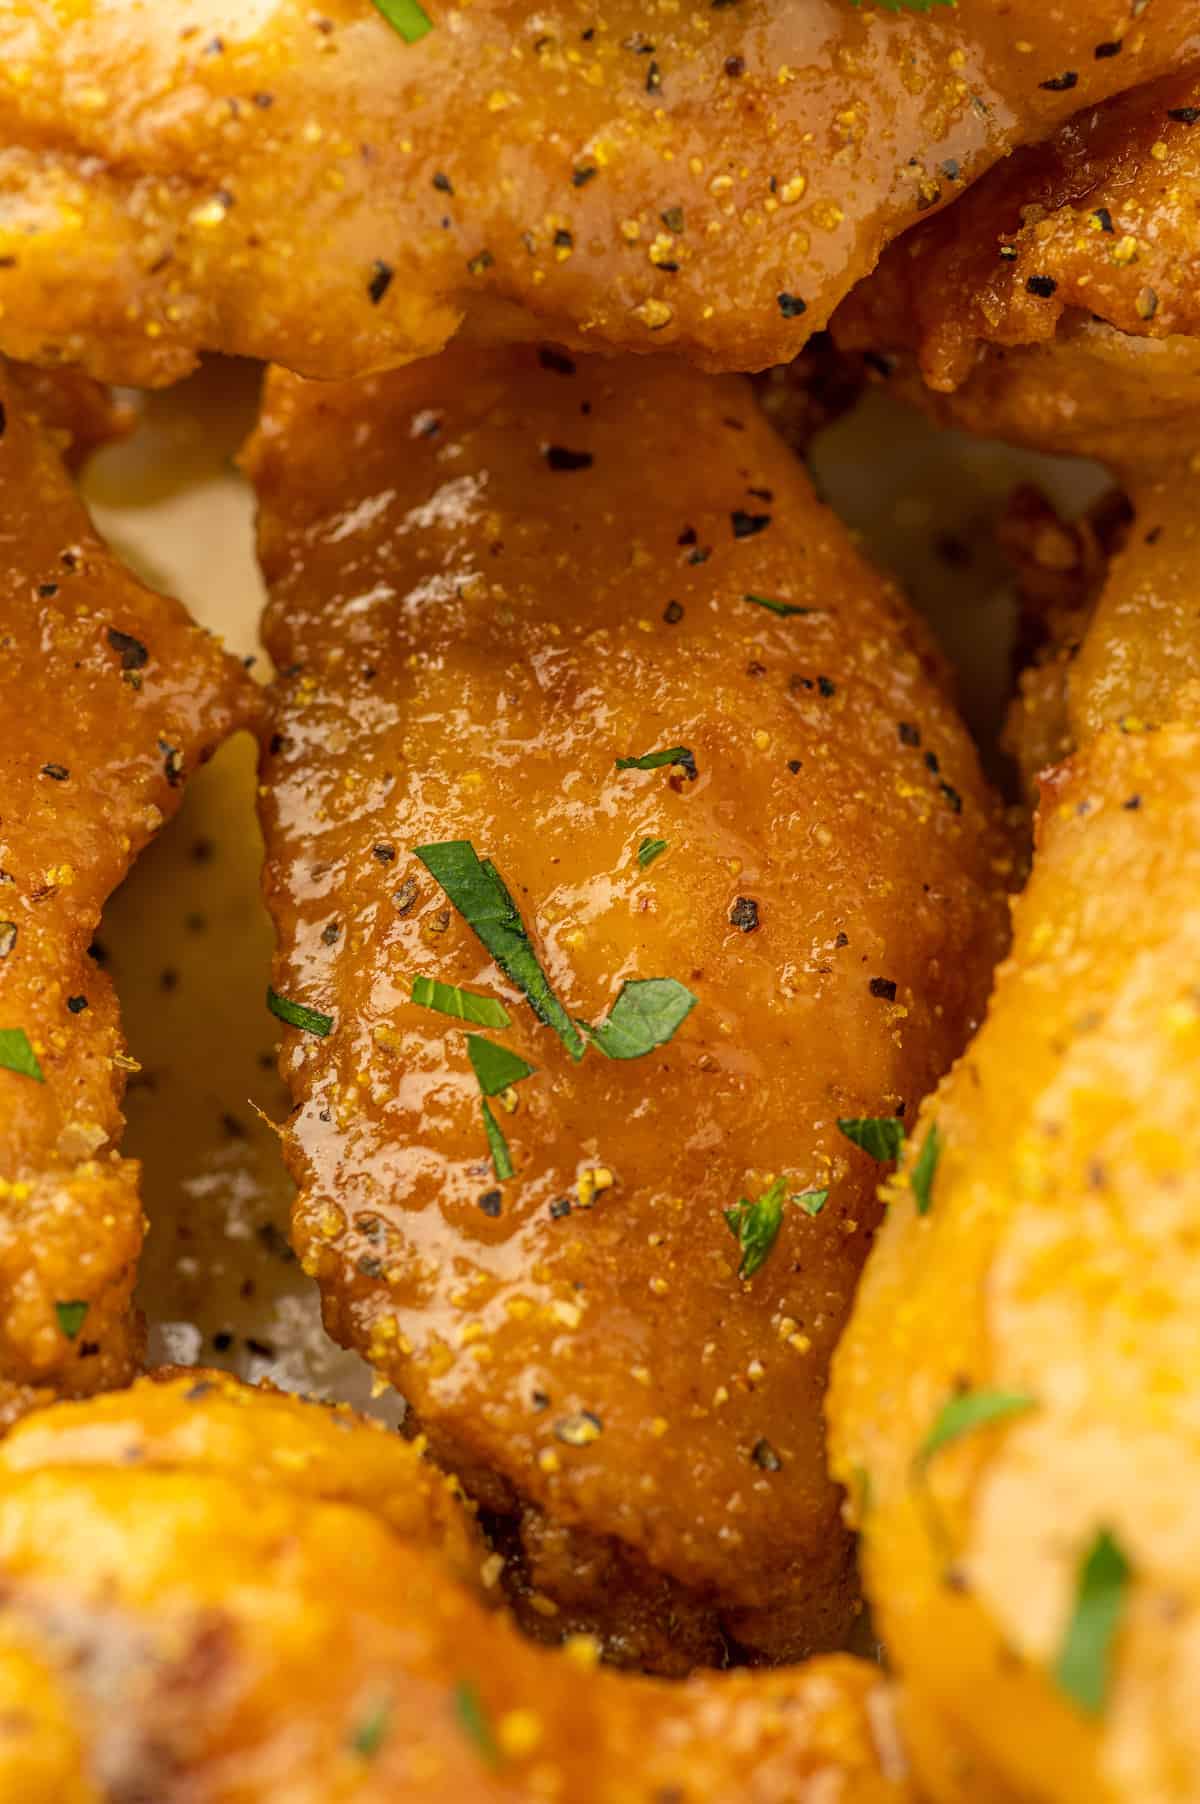 A close up of lemon-infused chicken wings sprinkled with pepper on a plate.